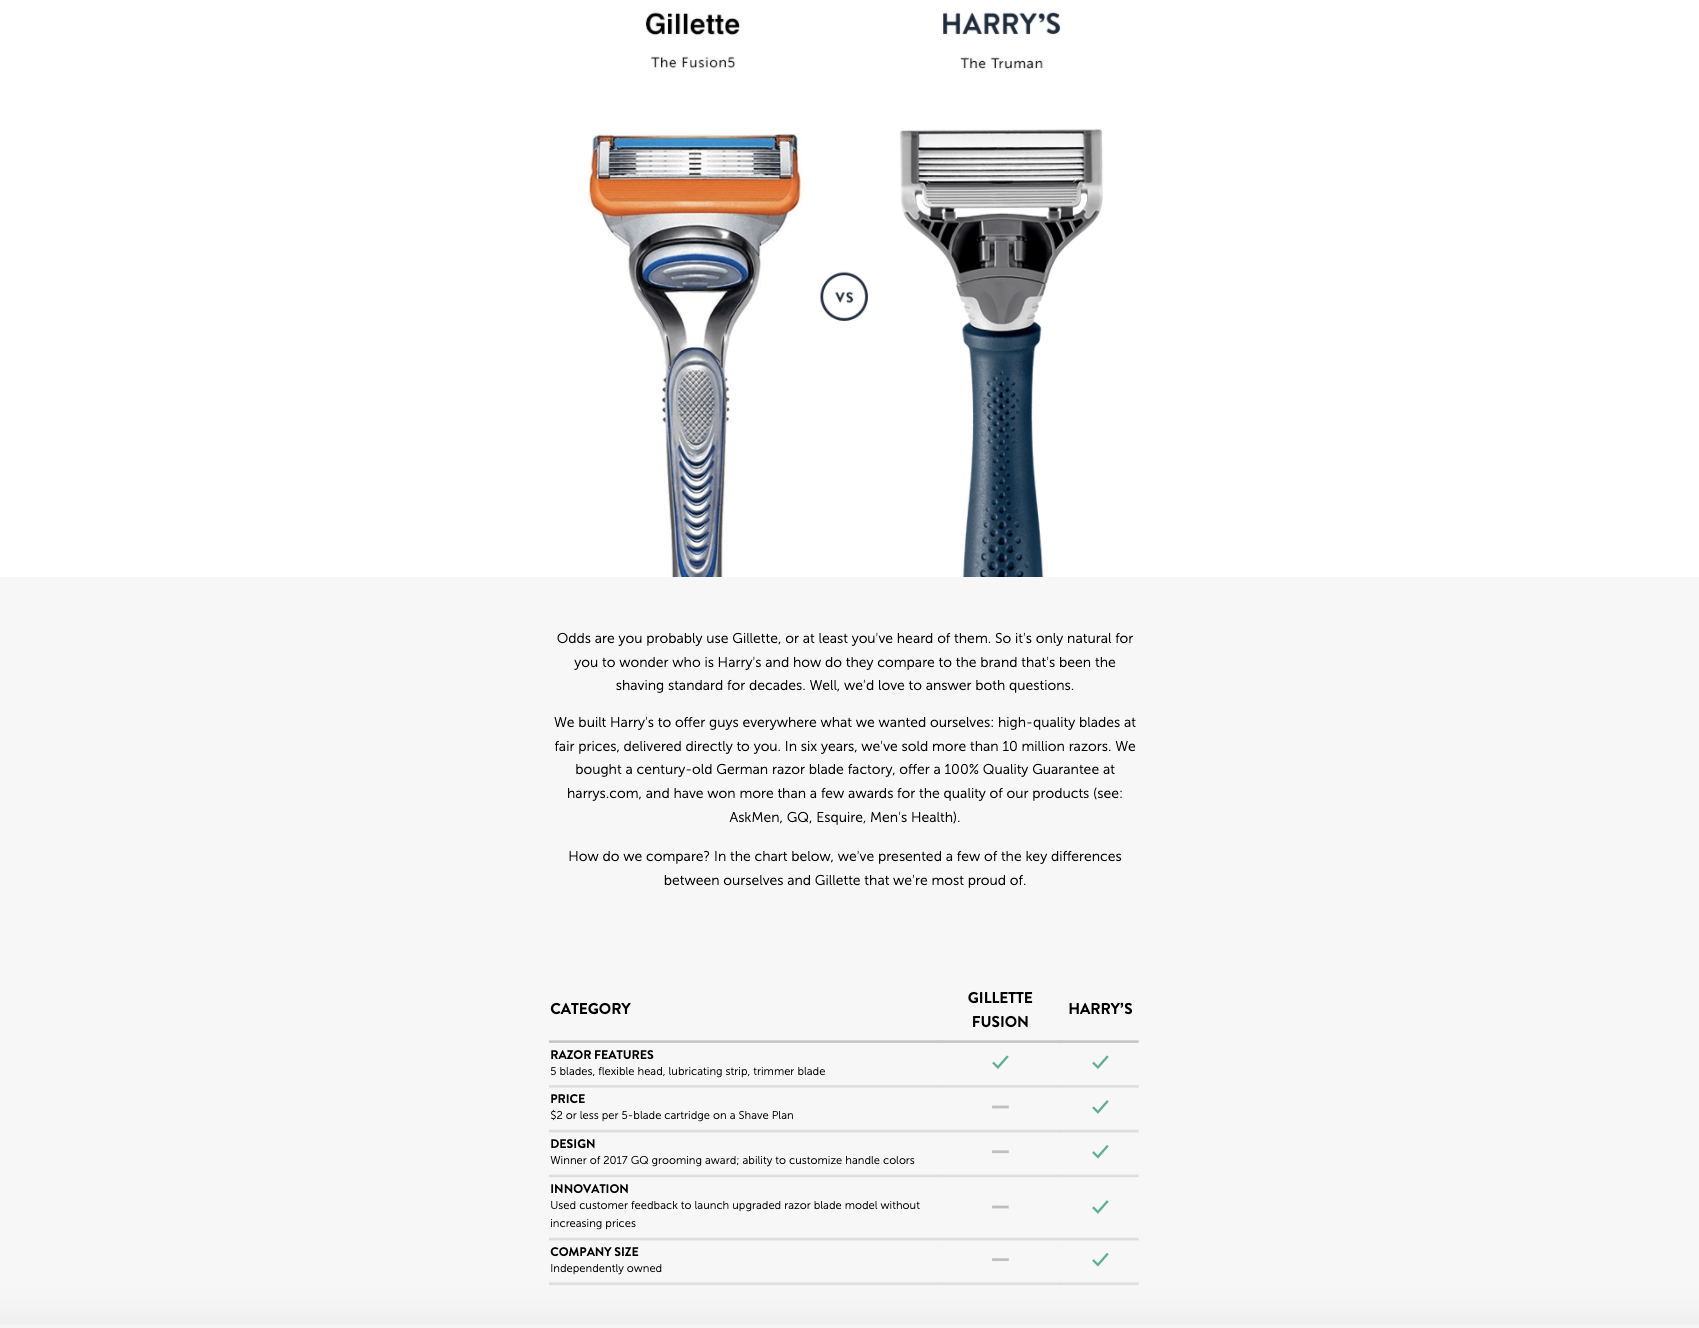 Landing page on Harry’s website showcasing differences between Gillette brand and Harry’s razors
